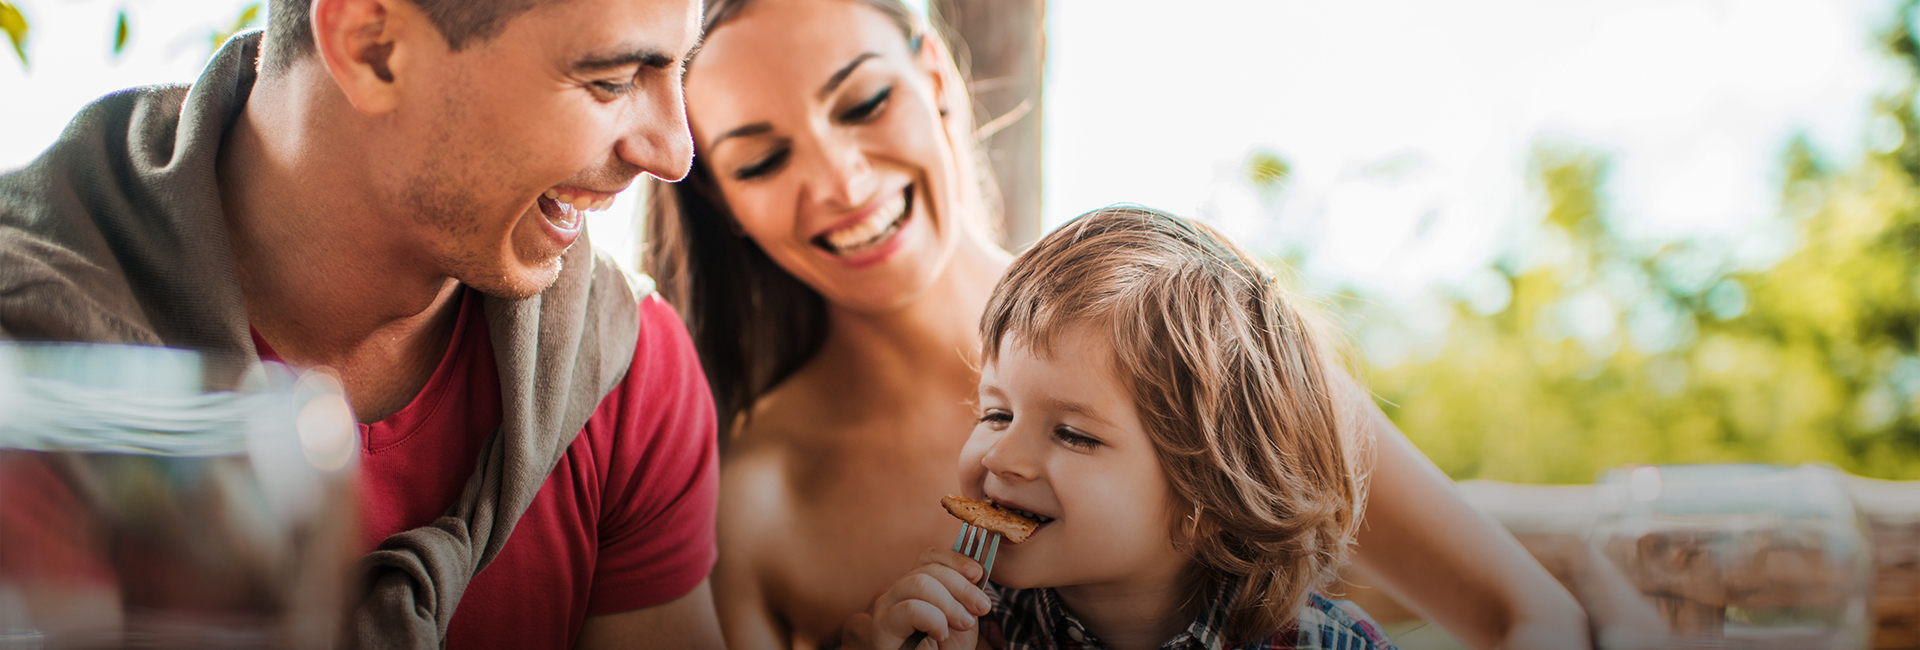 little boy biting slice of food with parents behind him